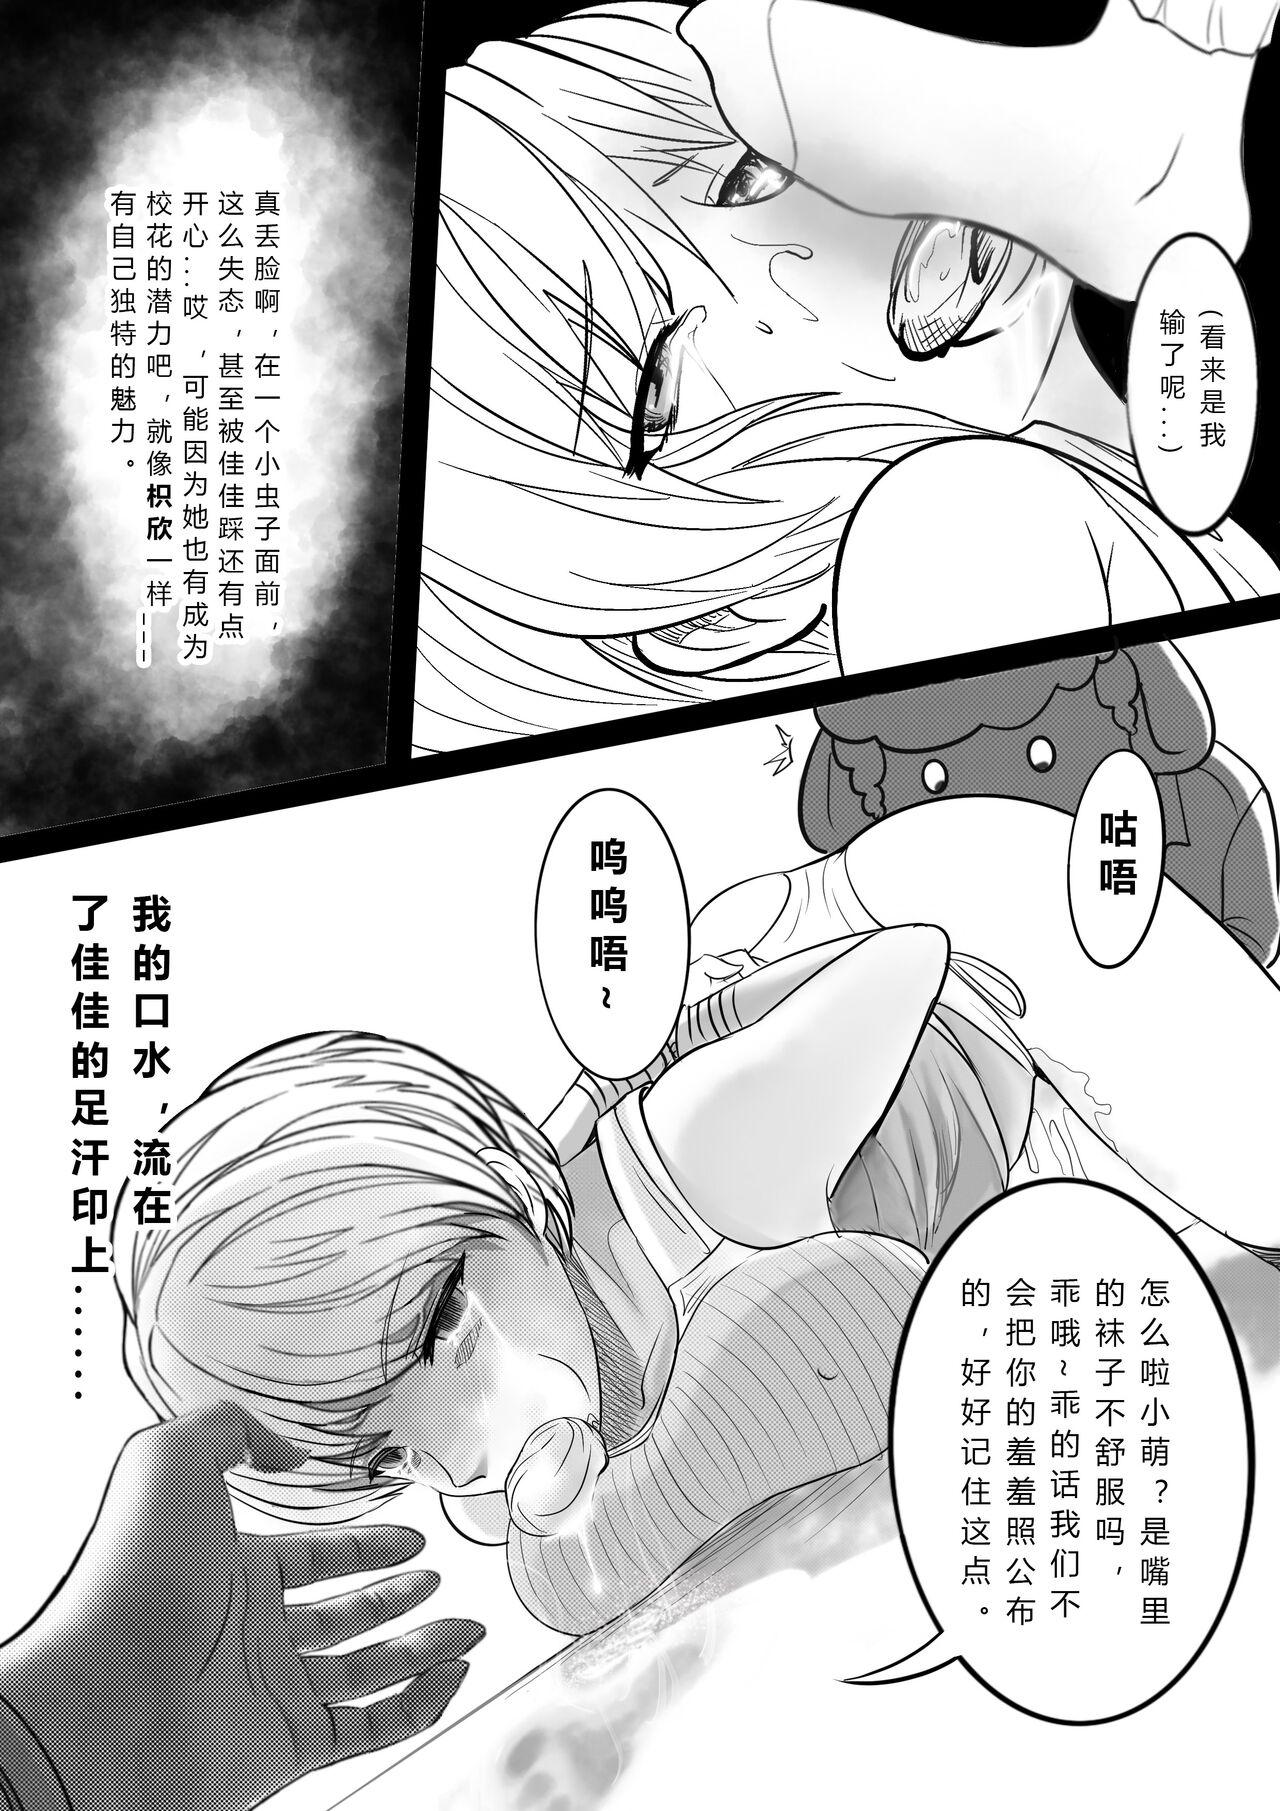 GOAT-goat Ⅱ special chapter 19